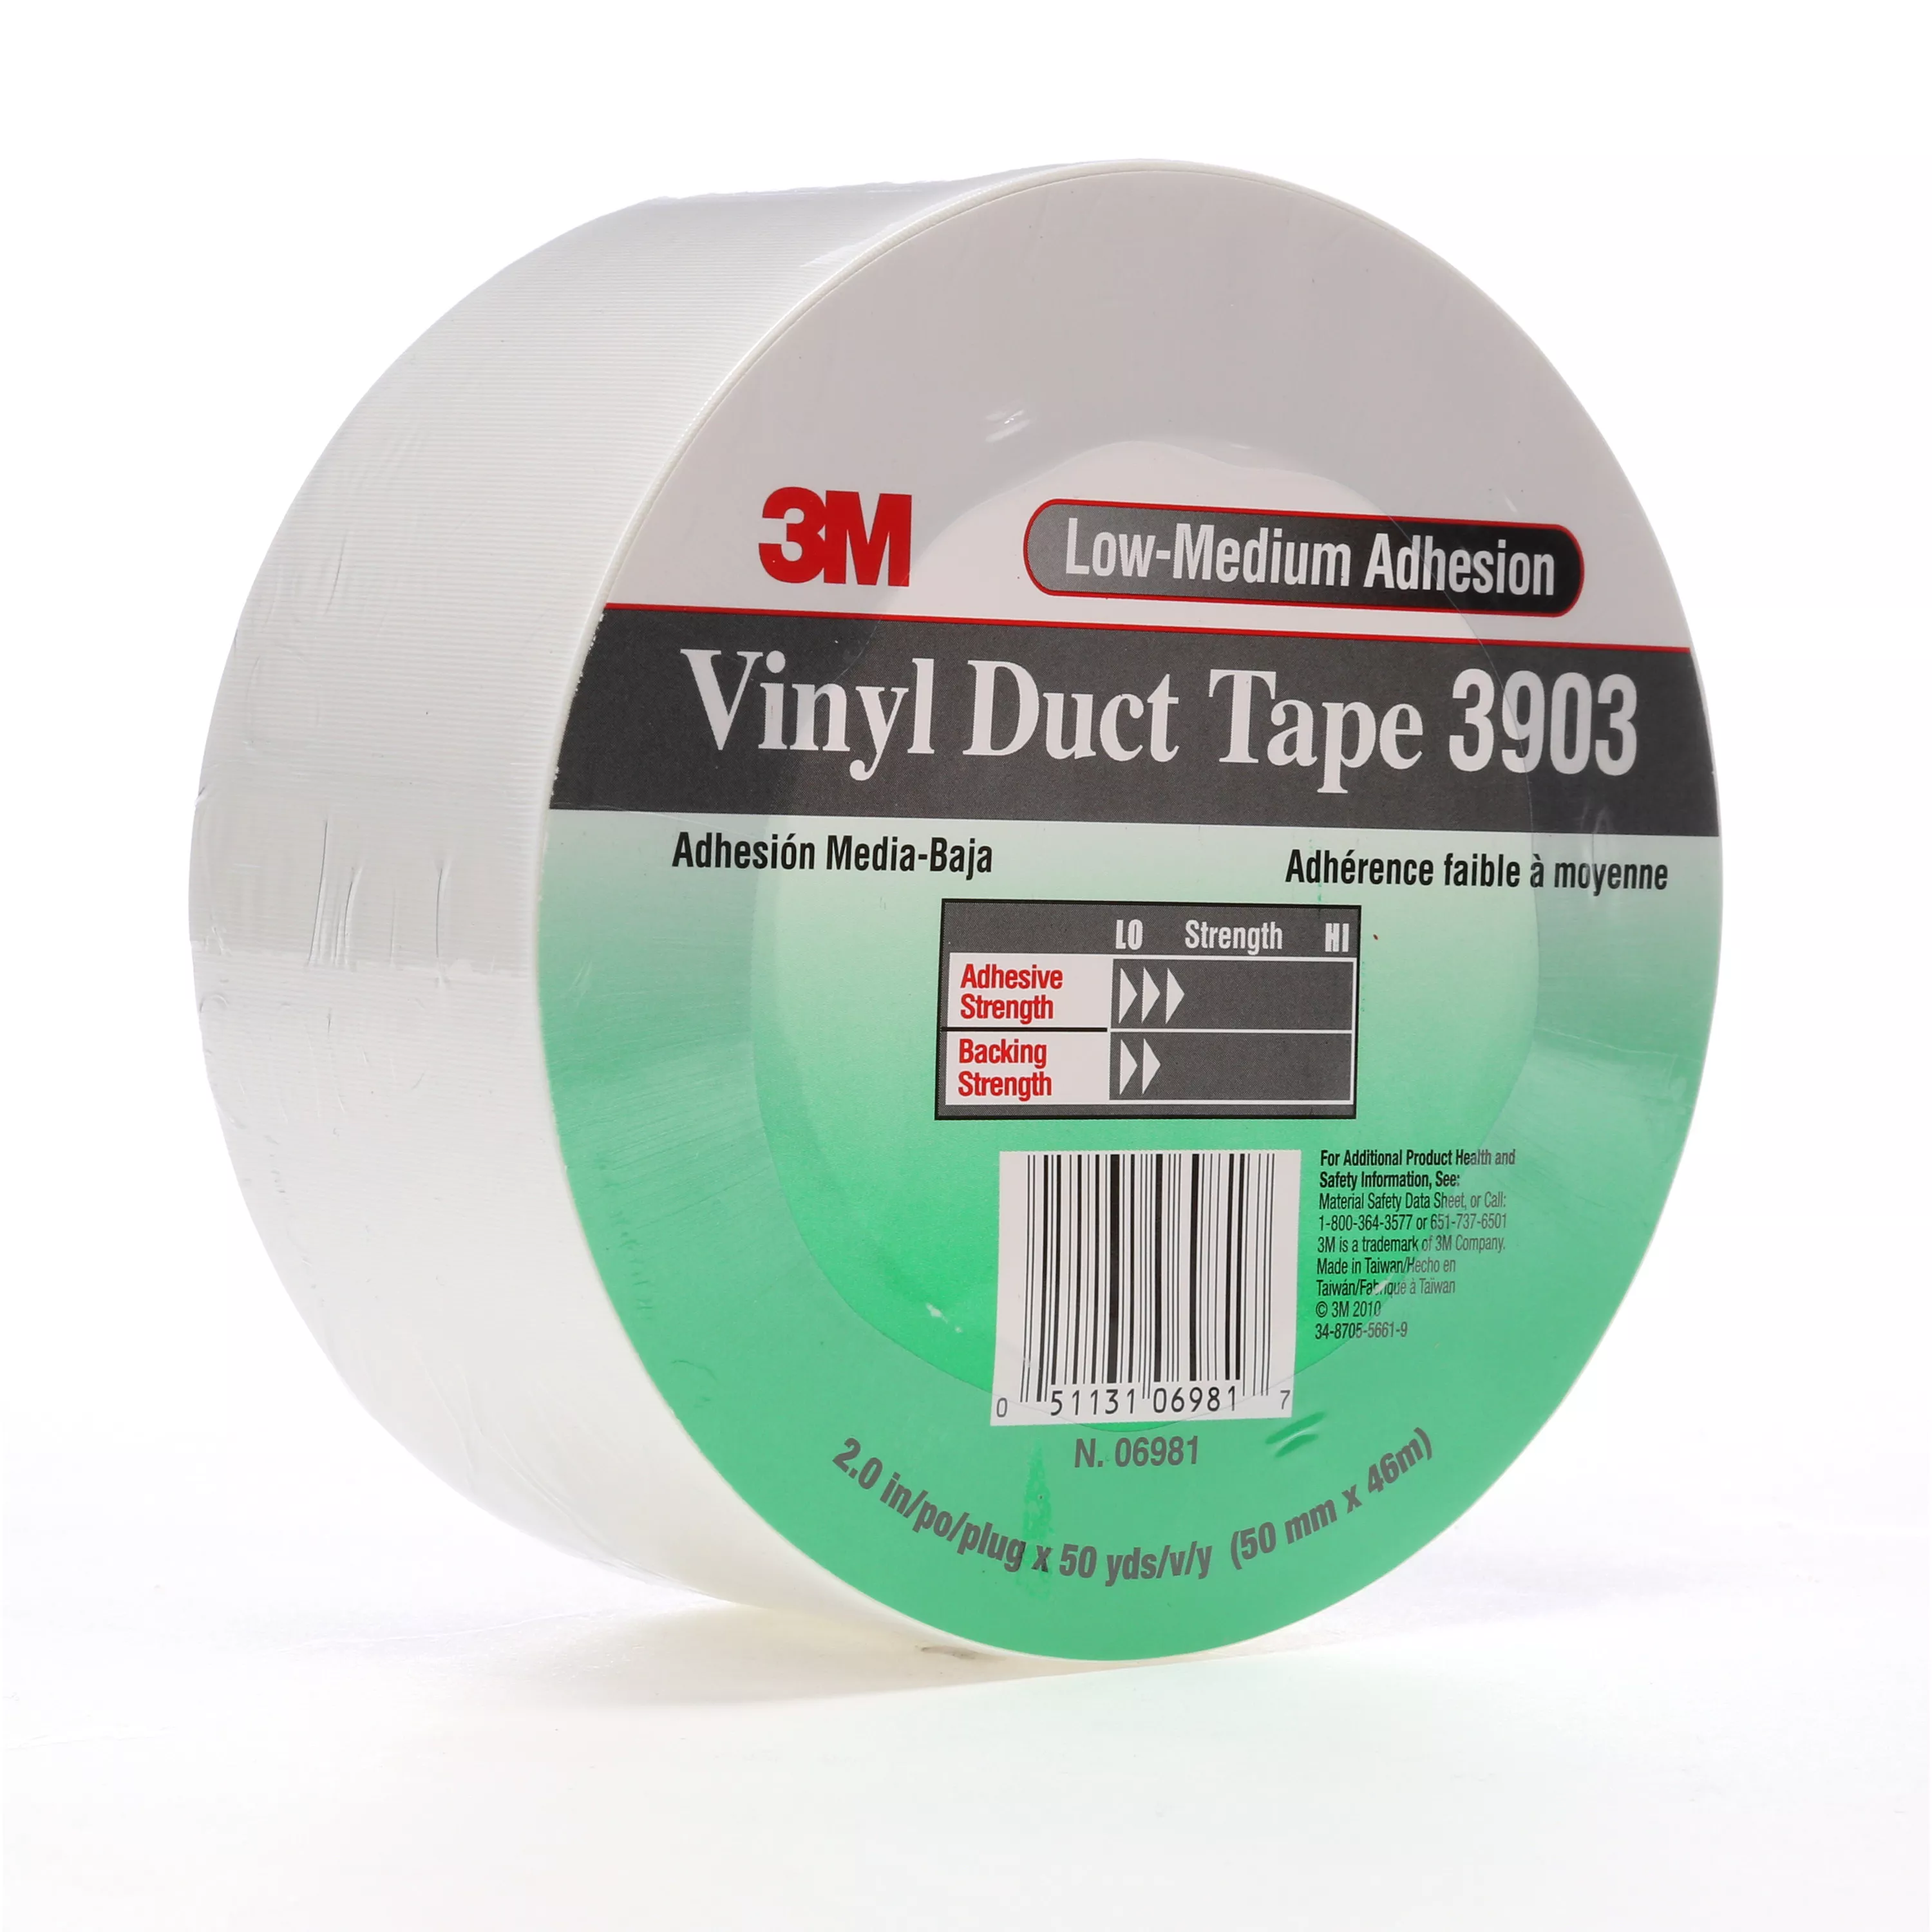 3M™ Vinyl Duct Tape 3903, White, 2 in x 50 yd, 6.5 mil, 24/Case,
Individually Wrapped Conveniently Packaged